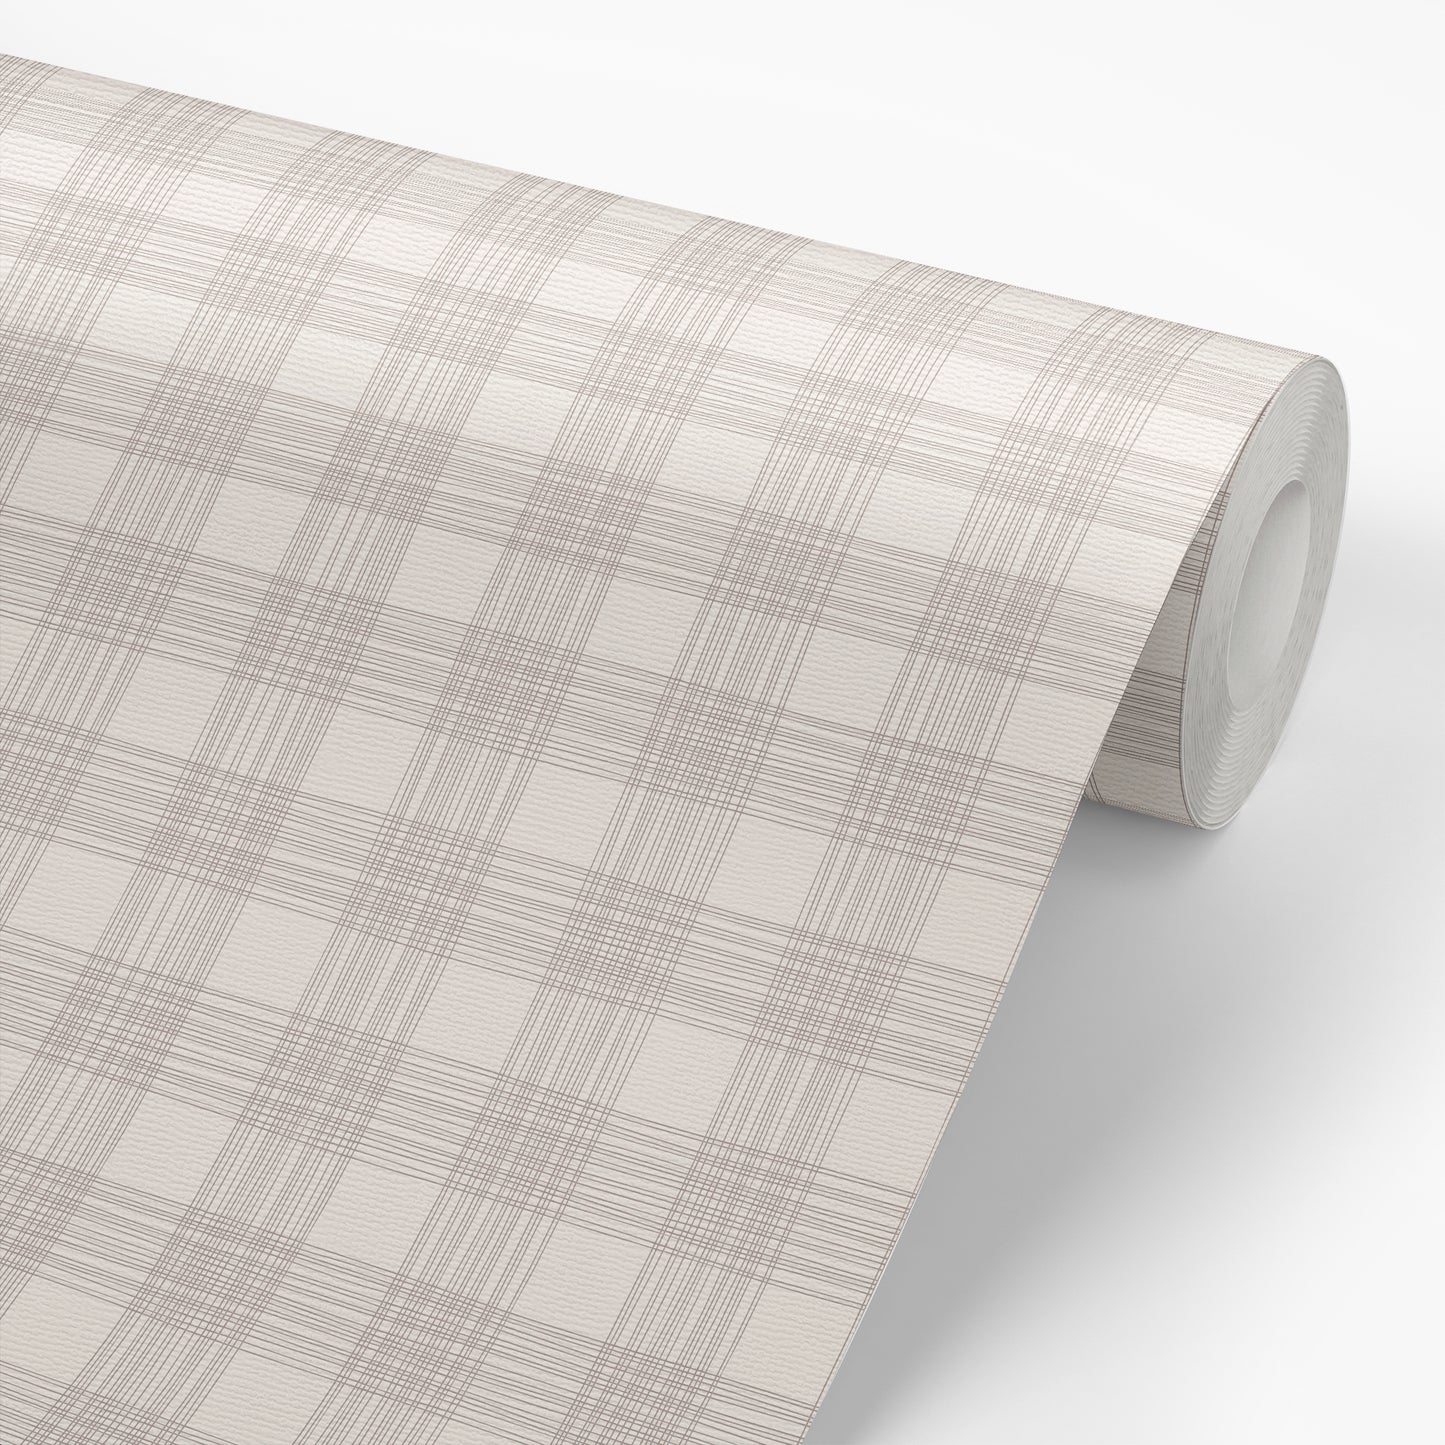 Wallpaper Roll featuring Ayara's Checked Marks Peel and Stick, Removable Wallpaper in Taupe